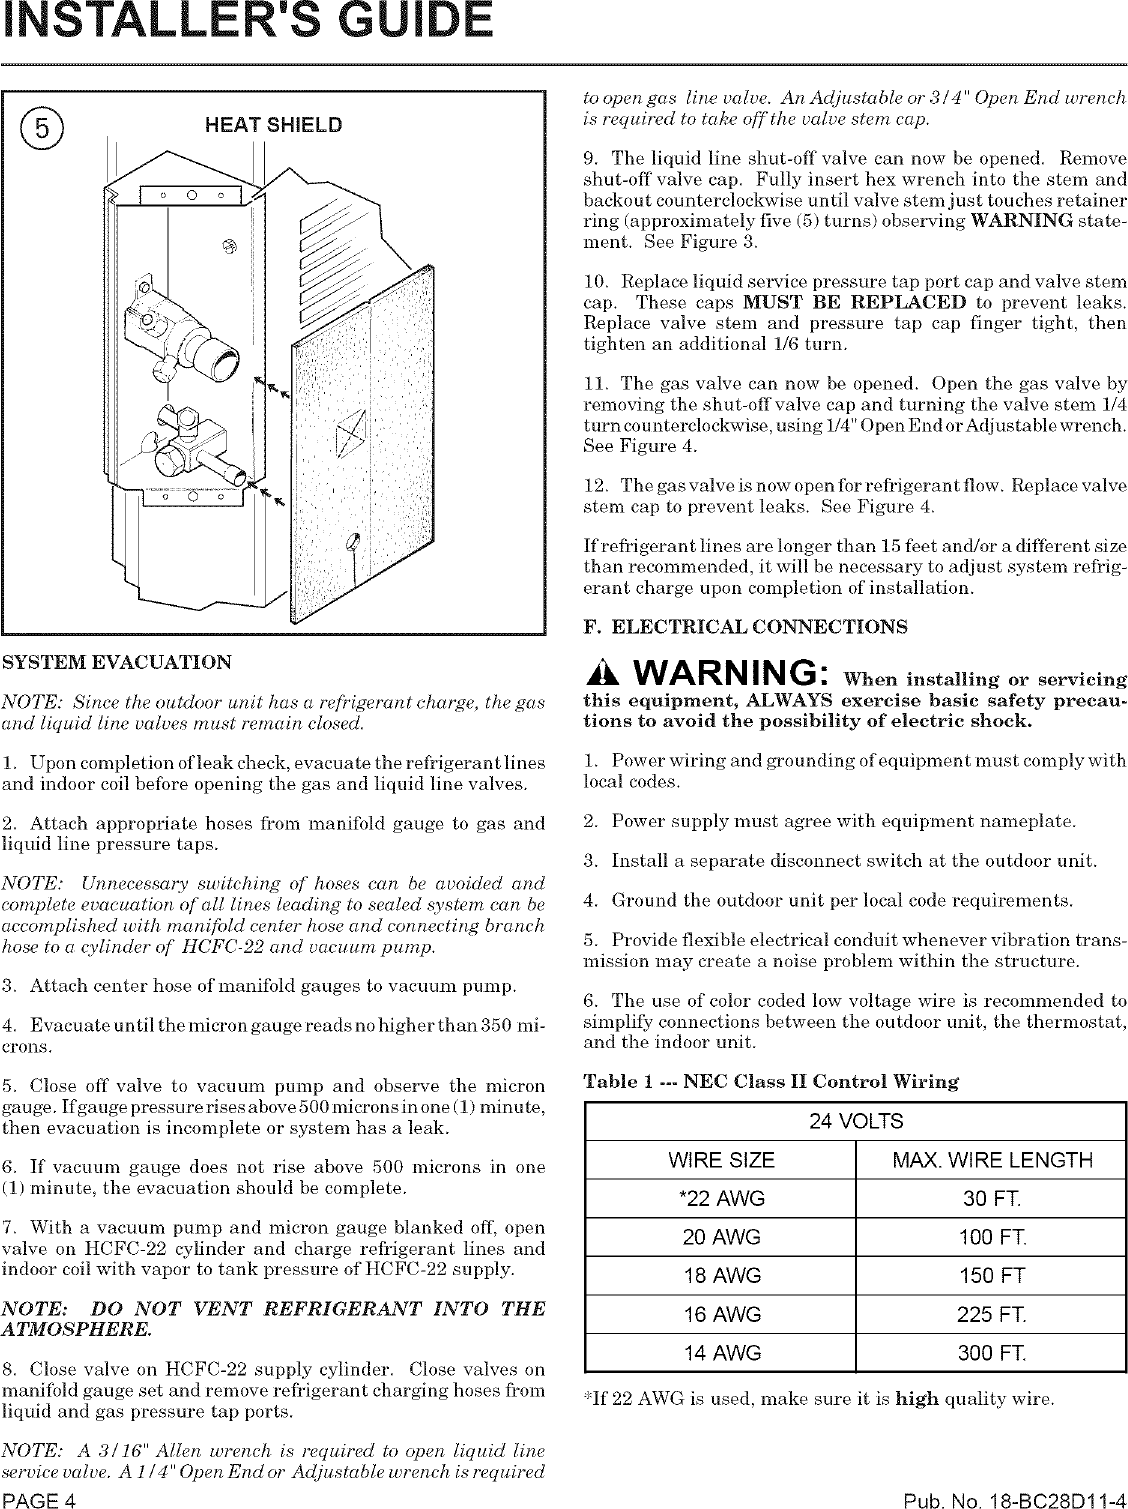 Page 4 of 8 - TRANE  Air Conditioner/heat Pump(outside Unit) Manual L0802003